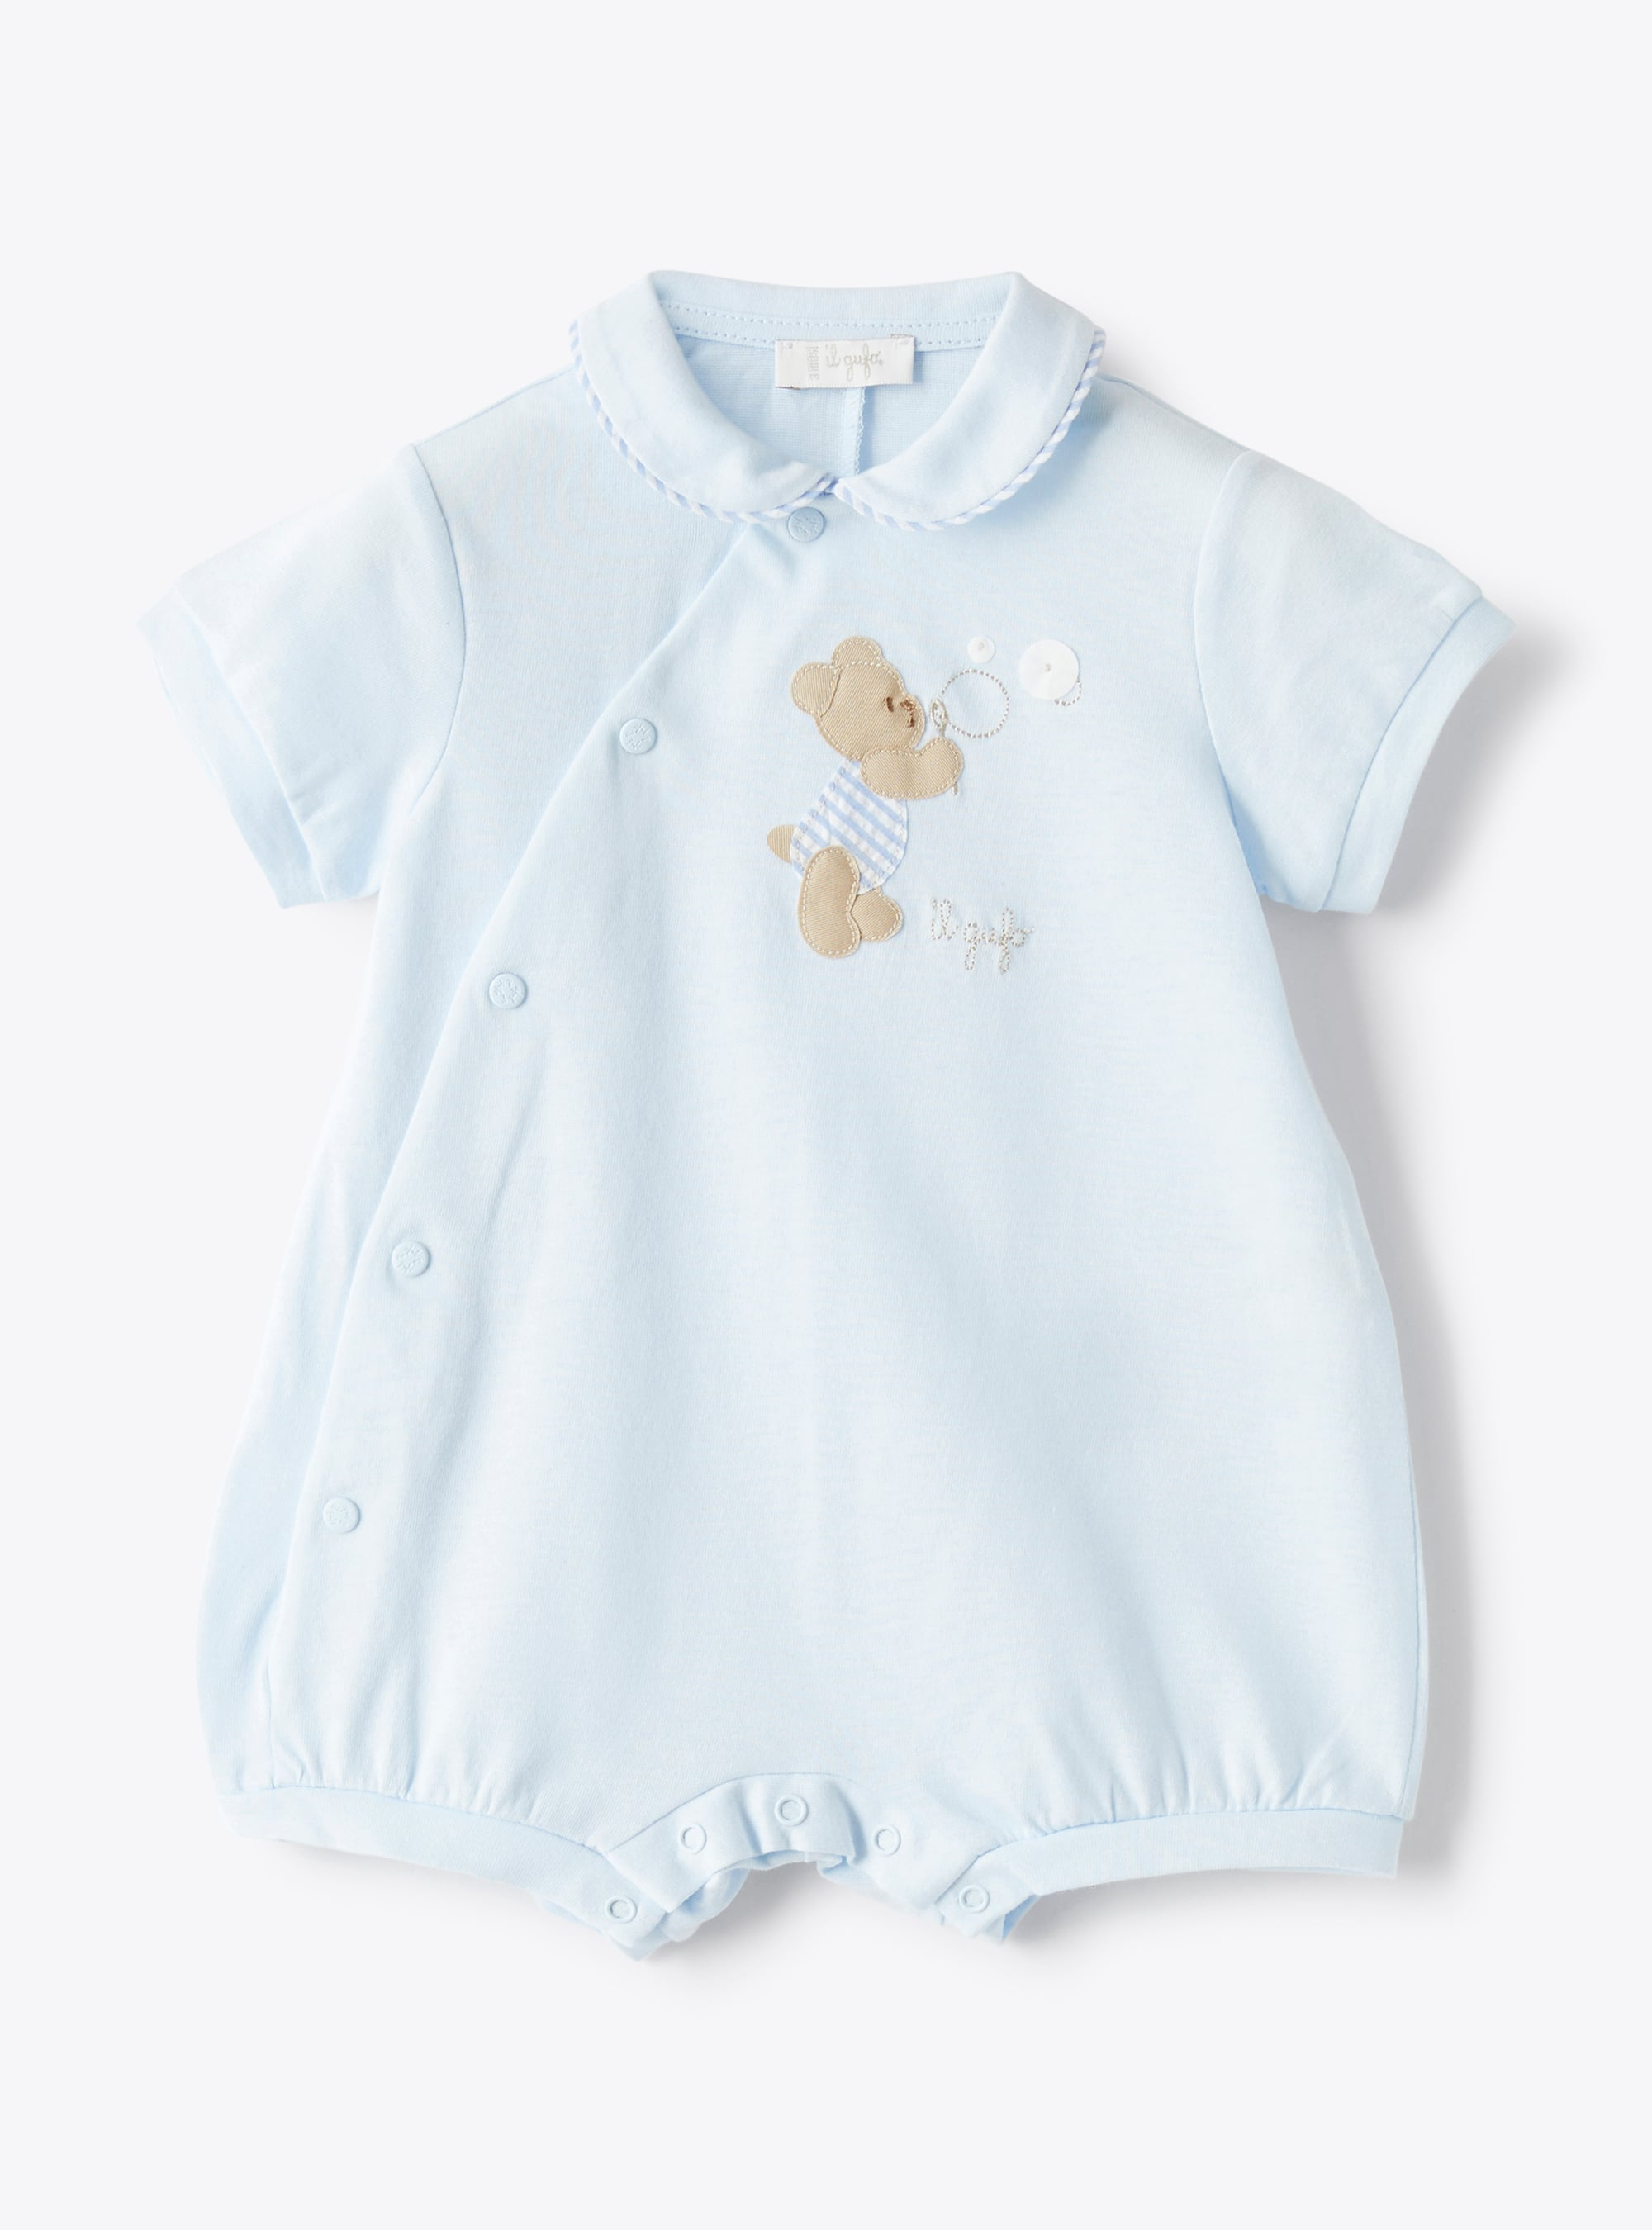 Jersey babysuit with bear picture - Babygrows - Il Gufo